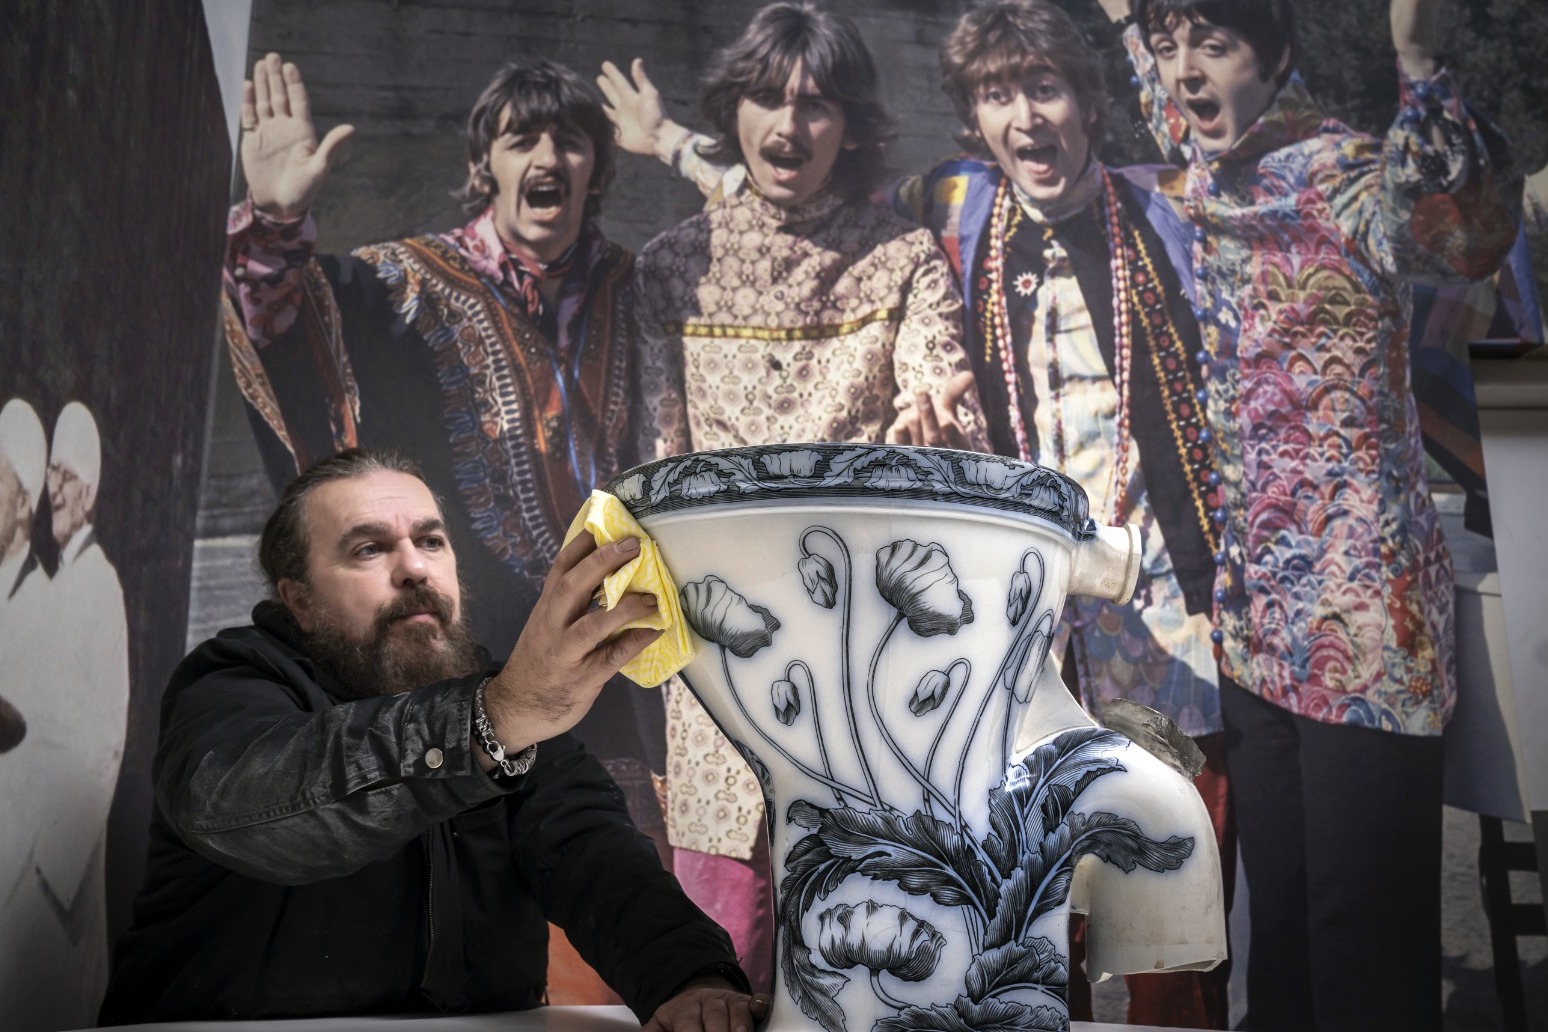 Beatles fans were flushed with excitement as John Lennon’s toilet went on display in a museum. 